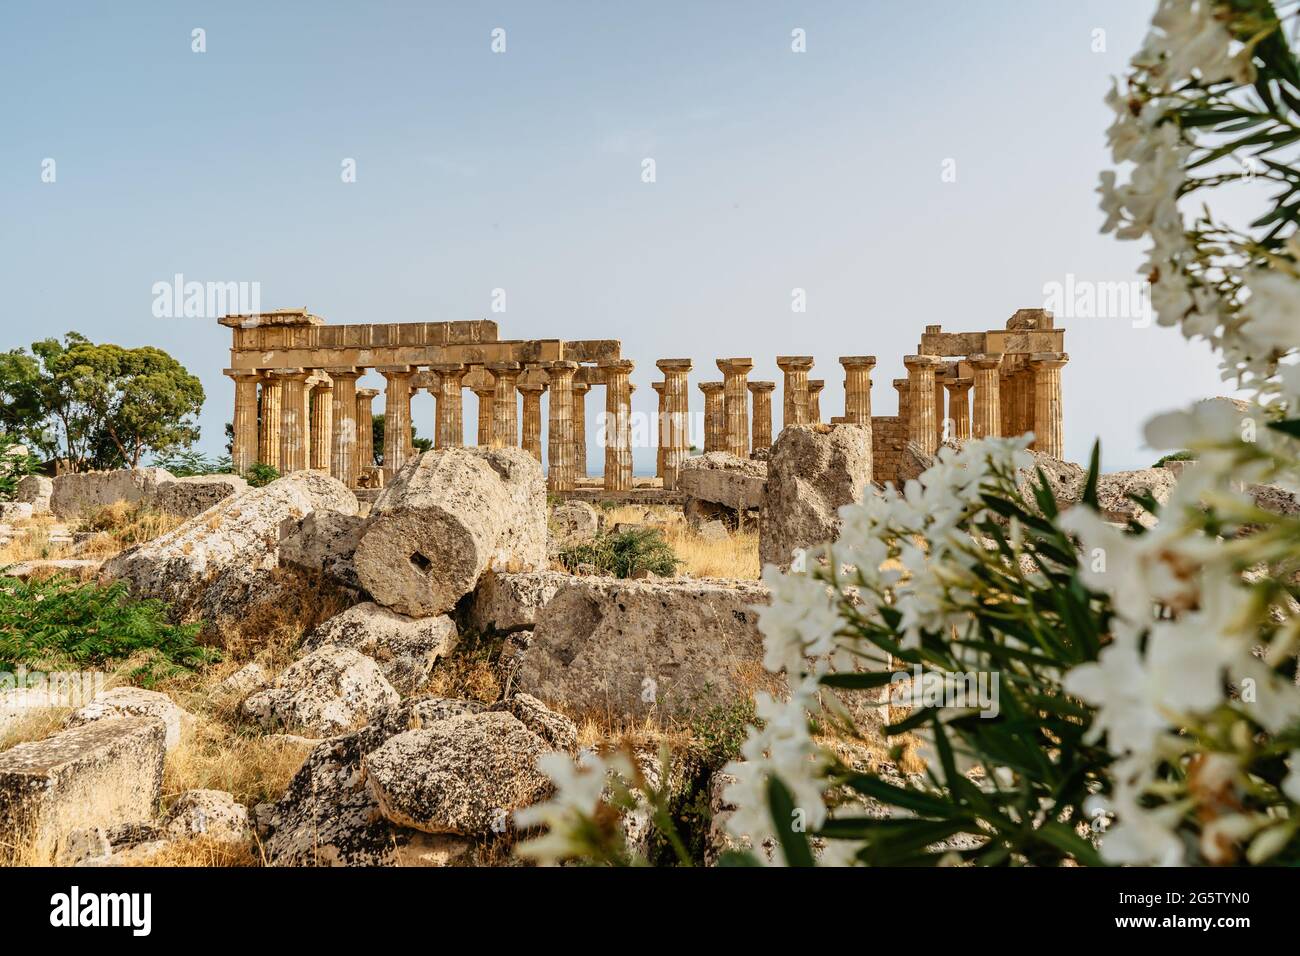 The Temple of Hera at Selinunte Archaeological Park,Sicily,Italy.Ruins of residential and commercial buildings in ancient Greek town of Selinus. Stock Photo